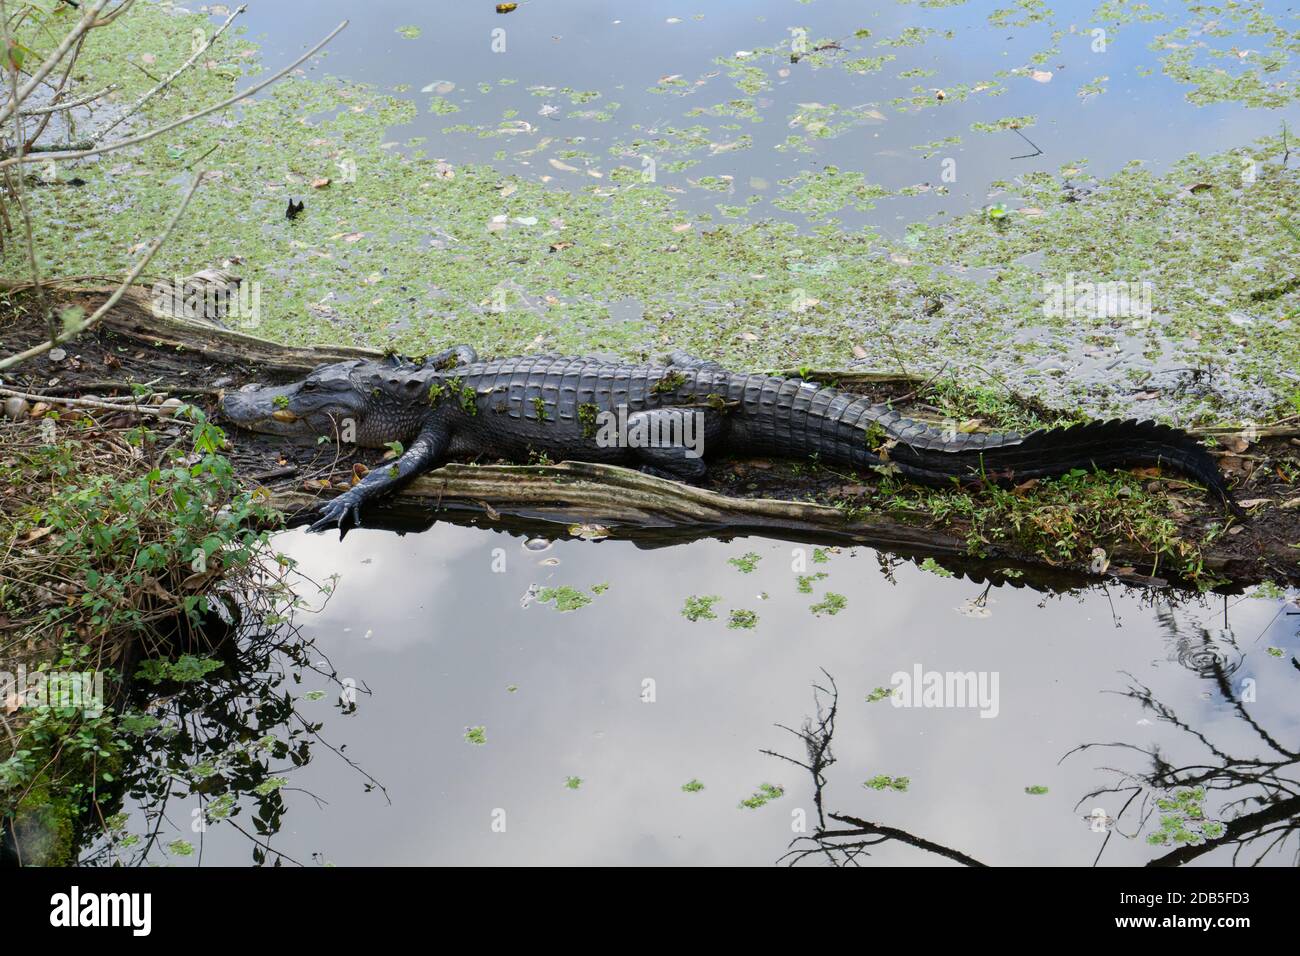 Large American Alligator (Alligator mississippiensis) covered in duckweed sitting on a log at Lettuce Lake Park, Tampa, Florida, USA Stock Photo